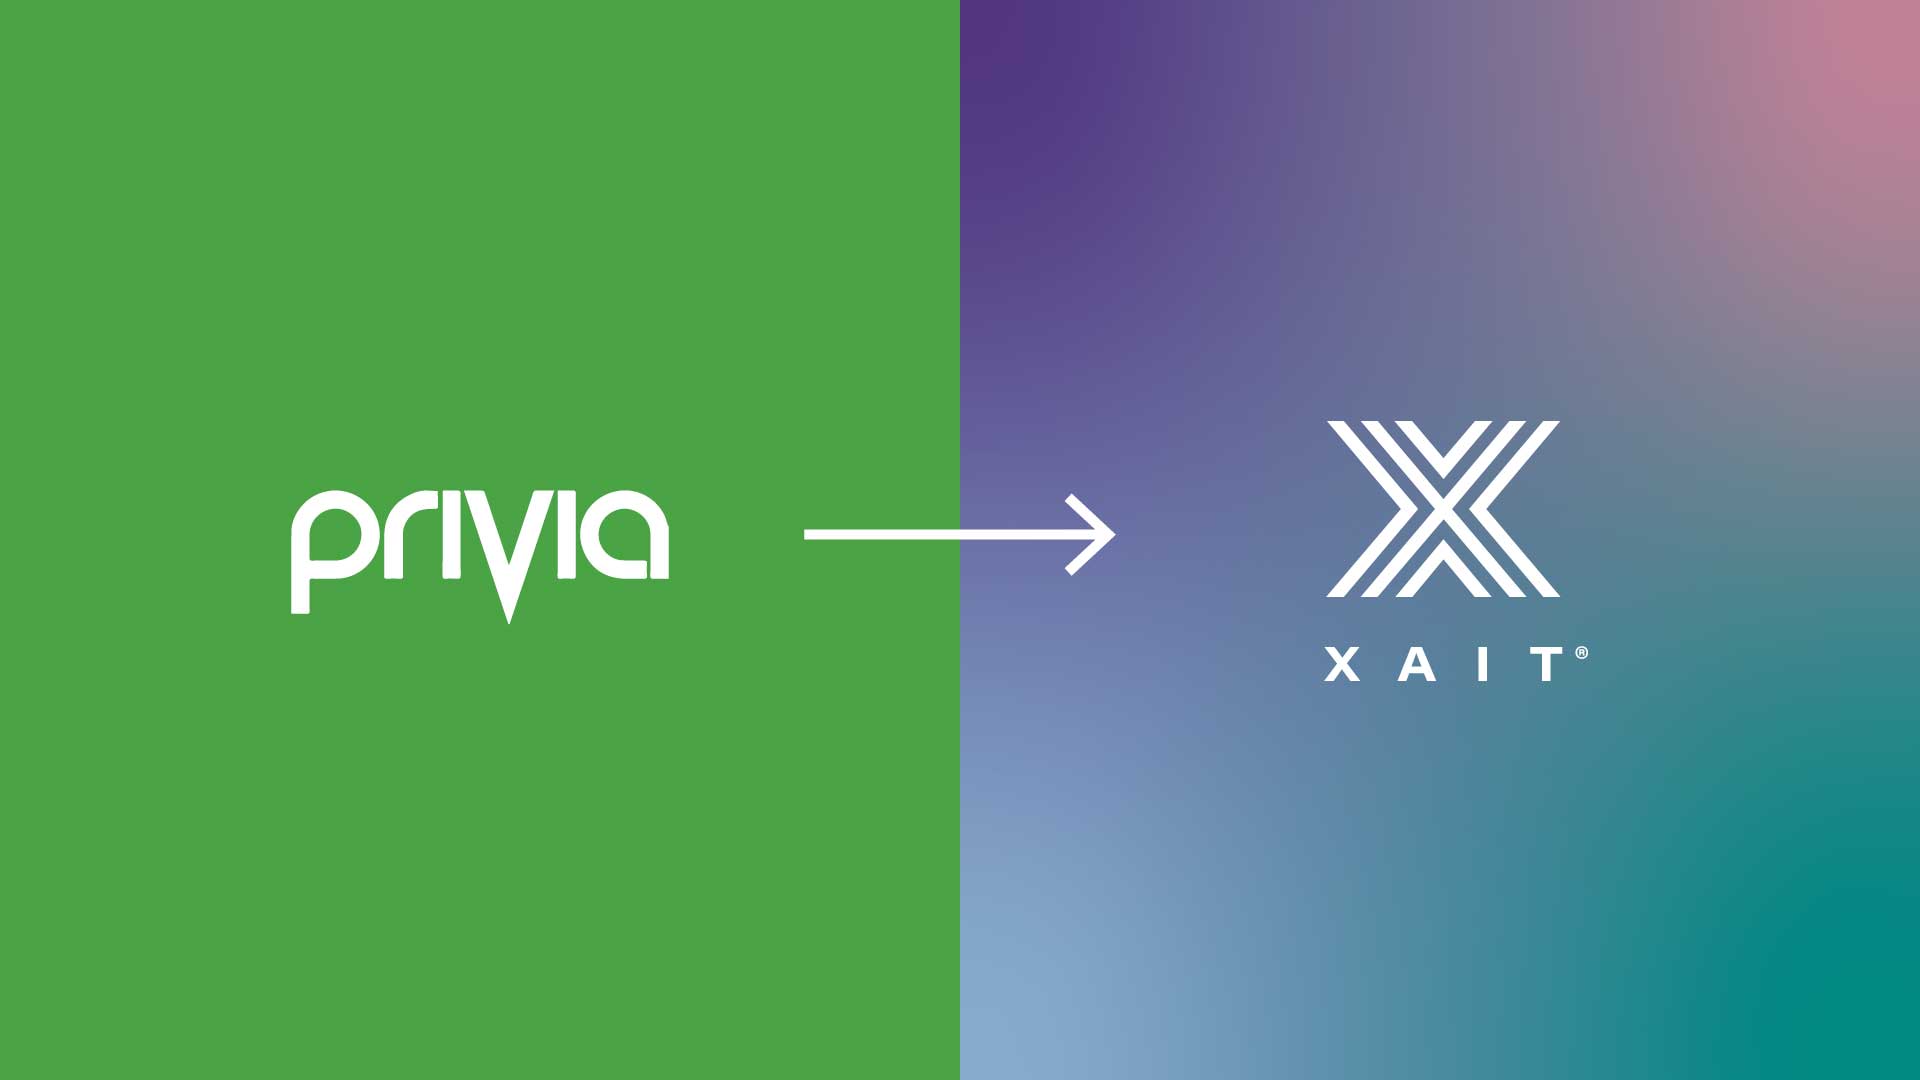 Privia became part of Xait Group in 2021